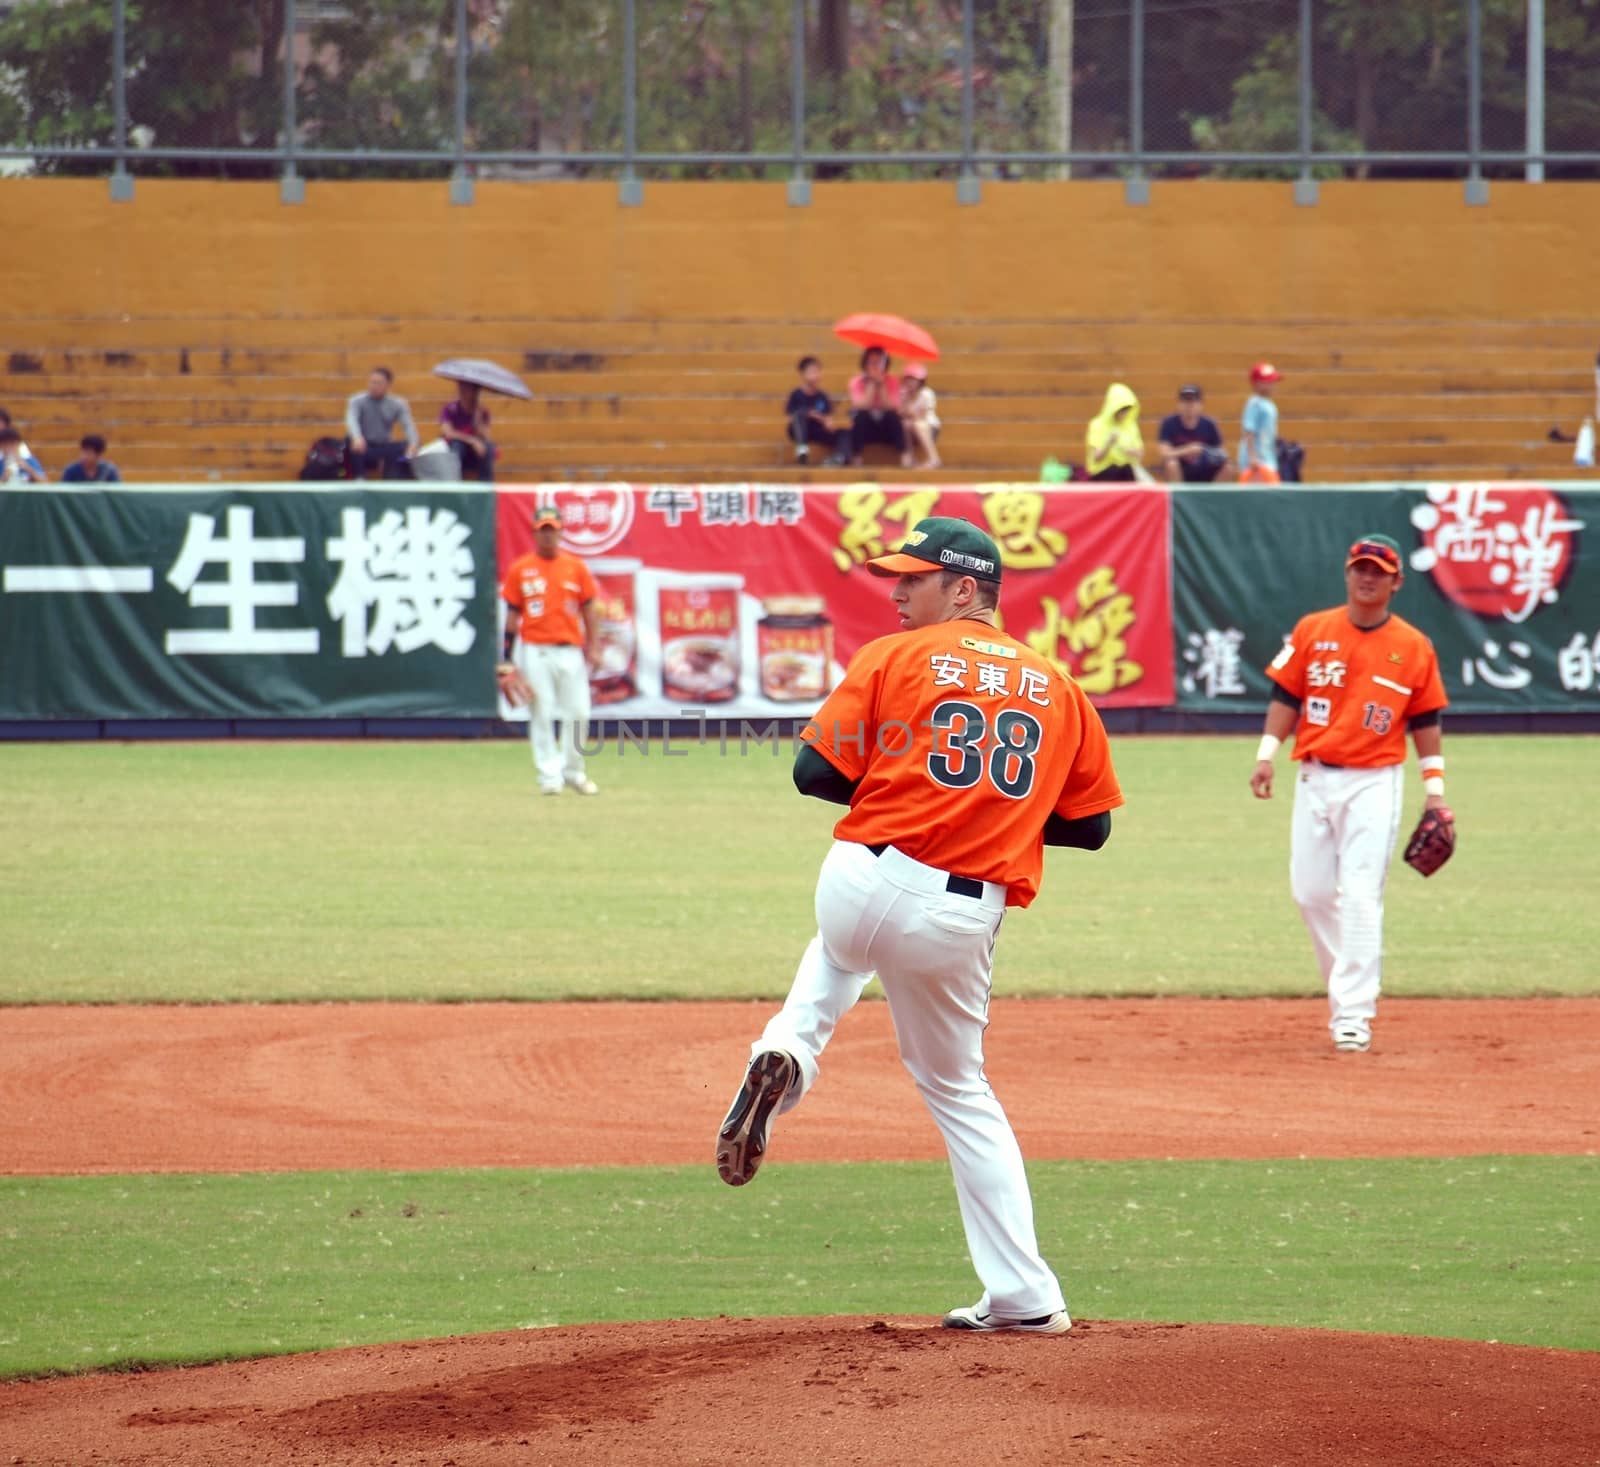 PINGTUNG, TAIWAN, APRIL 8: Pitcher Wordekemper of the President Lions in action in a game of the Pro Baseball League against the Lamigo Monkeys. The Lions won 2:0 on April 8, 2012 in Pingtung.